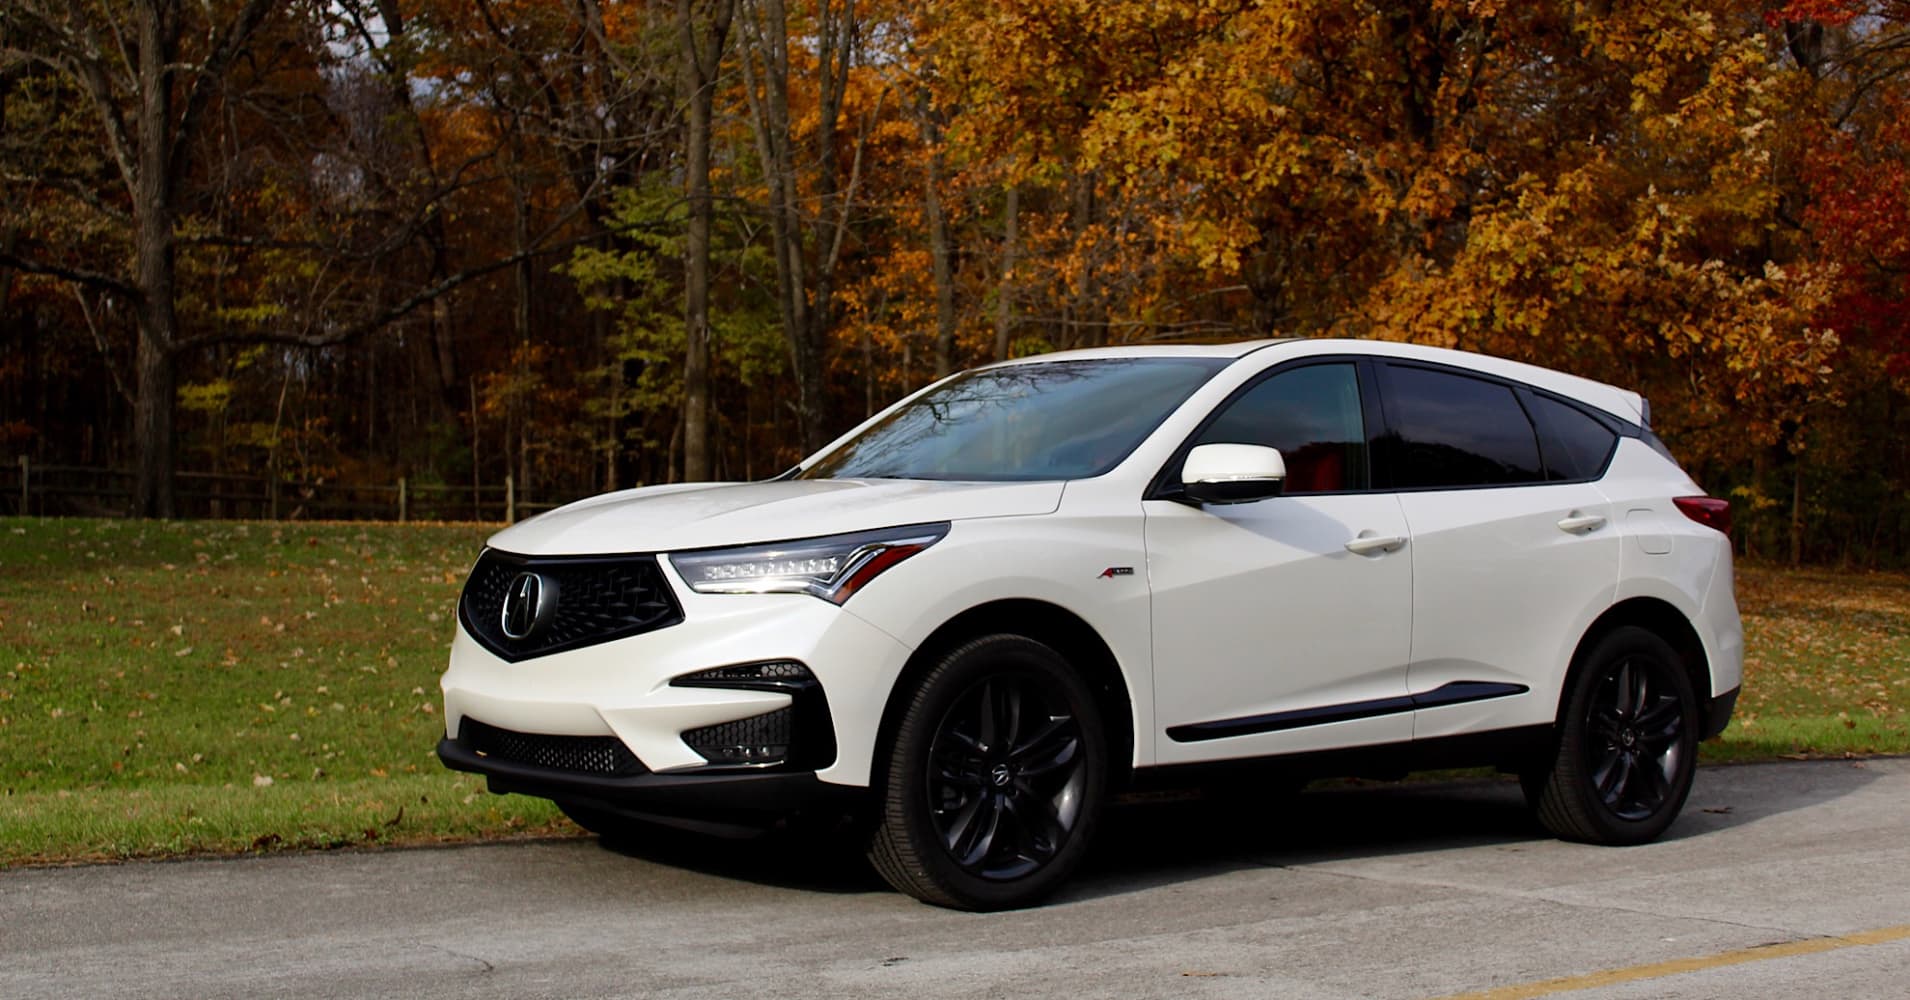 2019 Acura RDX review